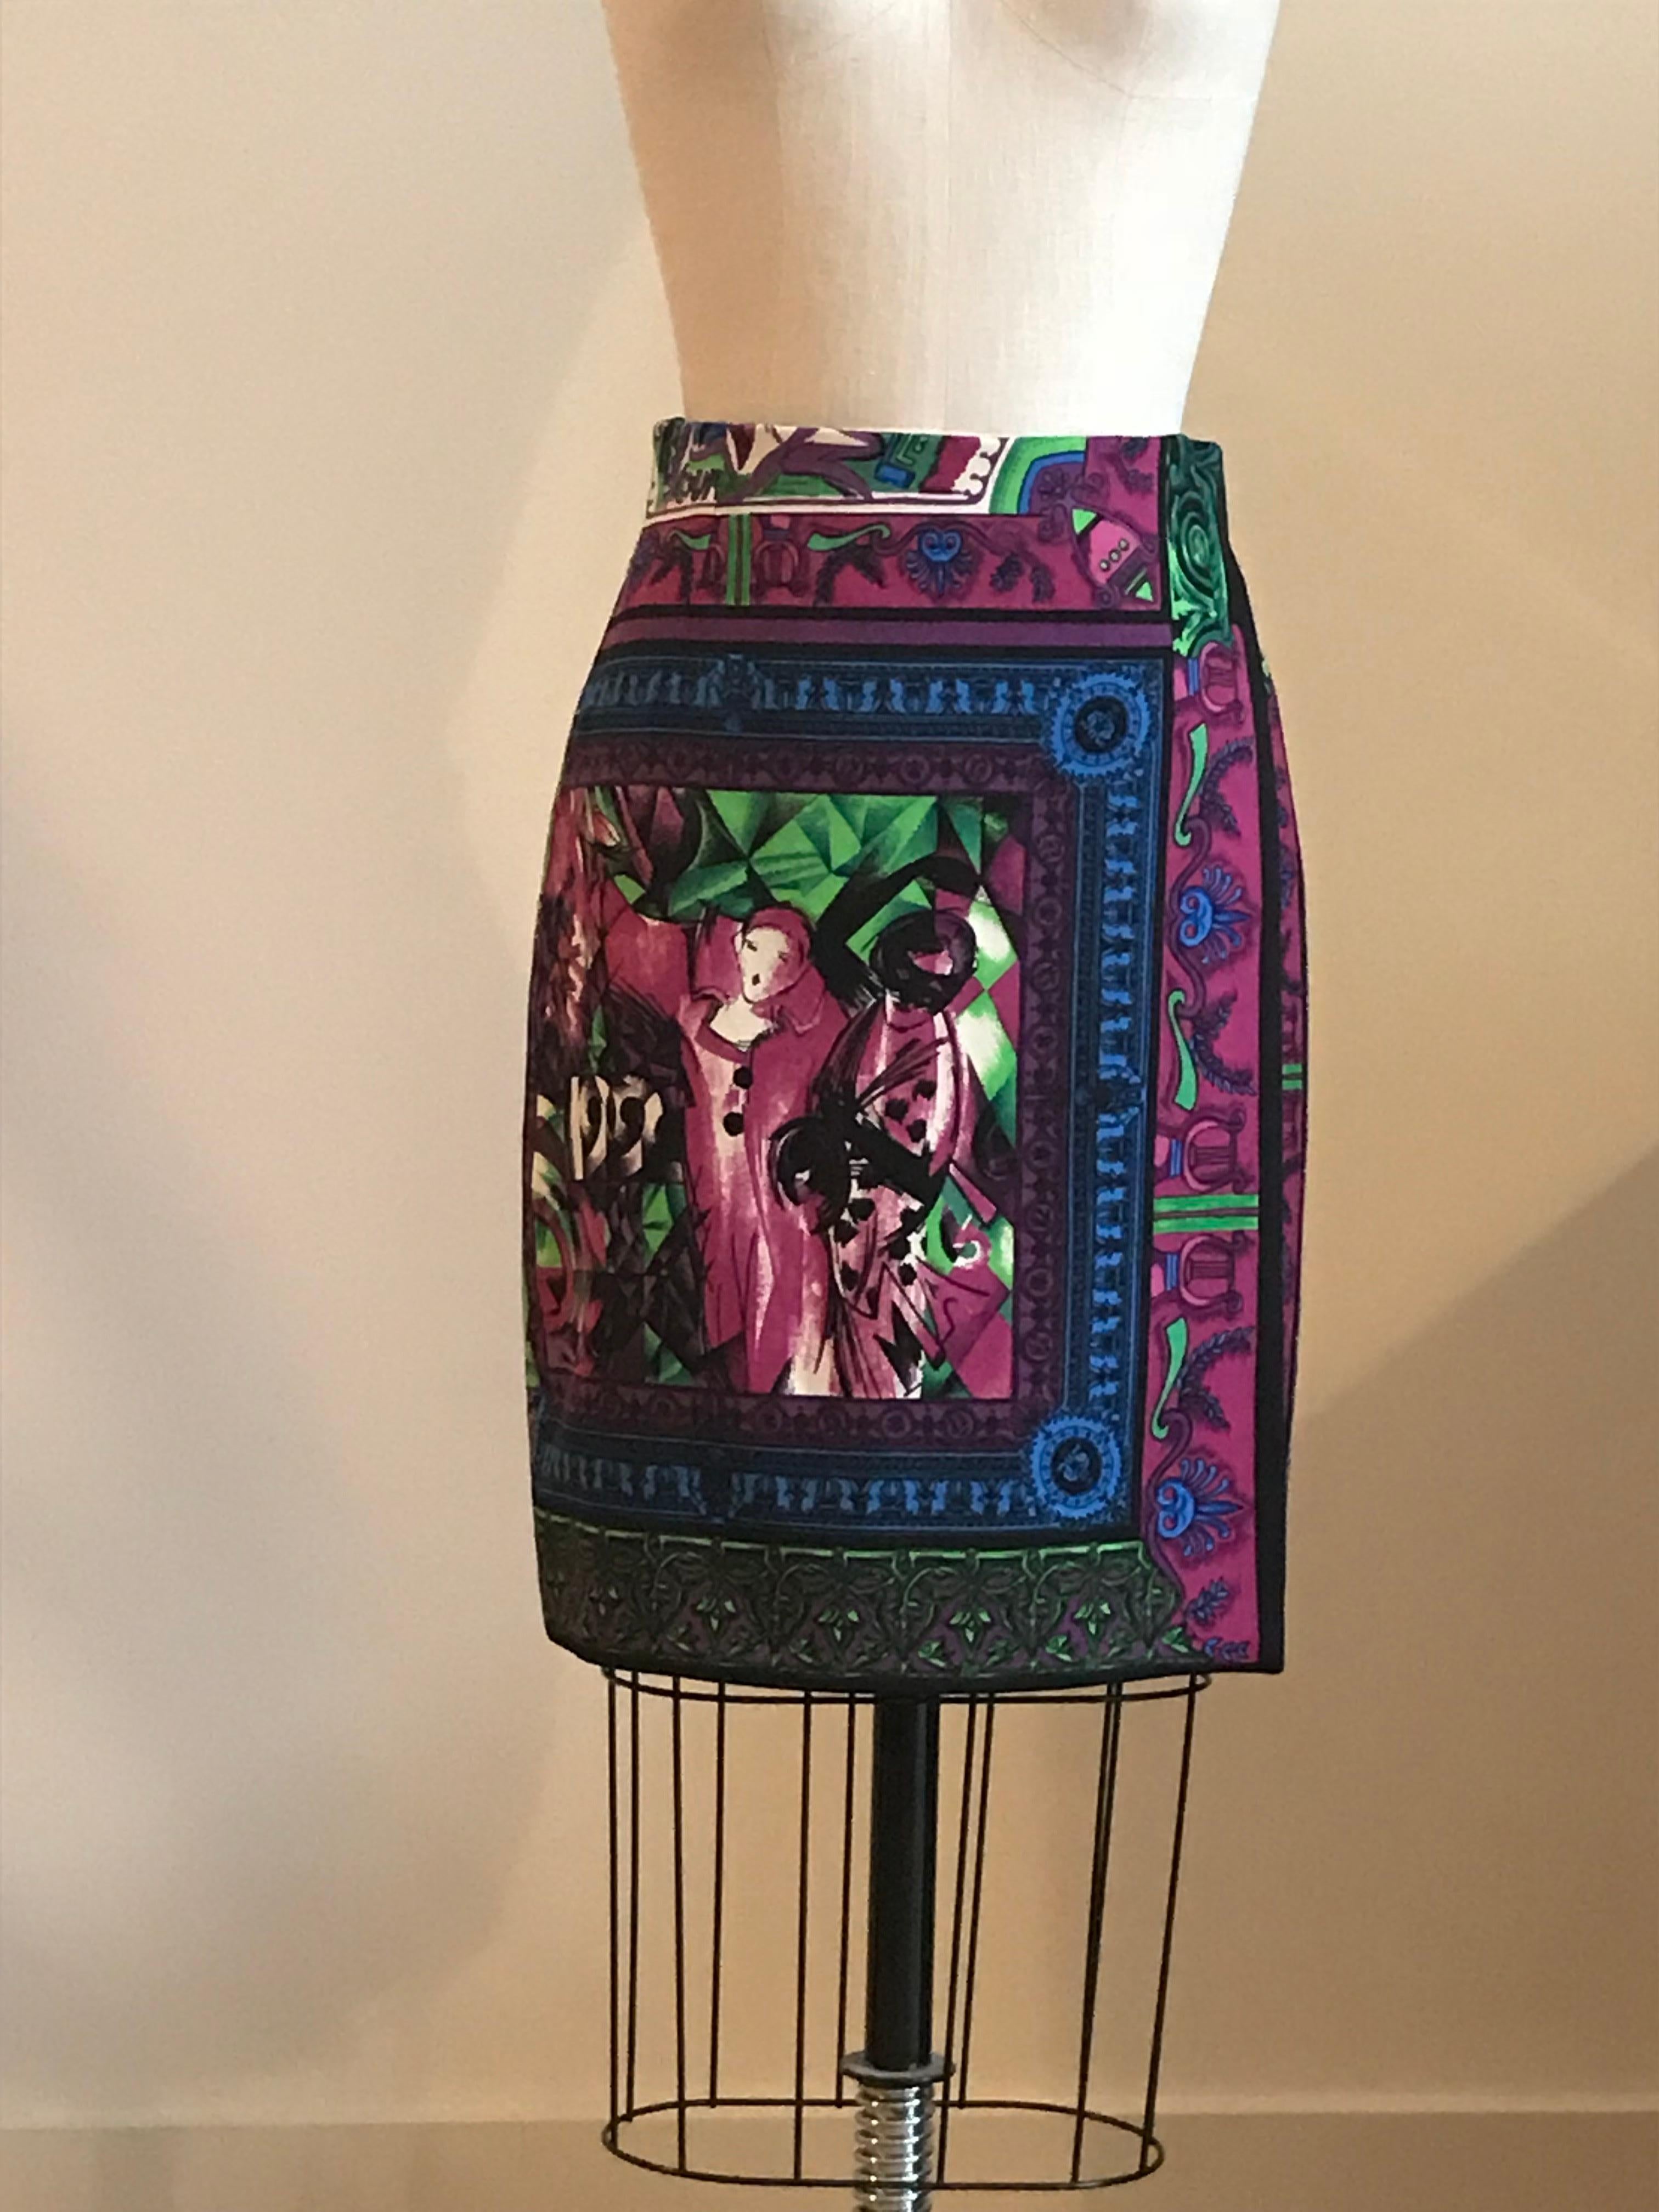 Gianni Versace 1990s skirt in a faux wrap style features wild signature print in purple, fuchsia, blue, and green. Front features two ladies who appear to be going to a masquerade ball with abstract print reading '1990' and back features intricate